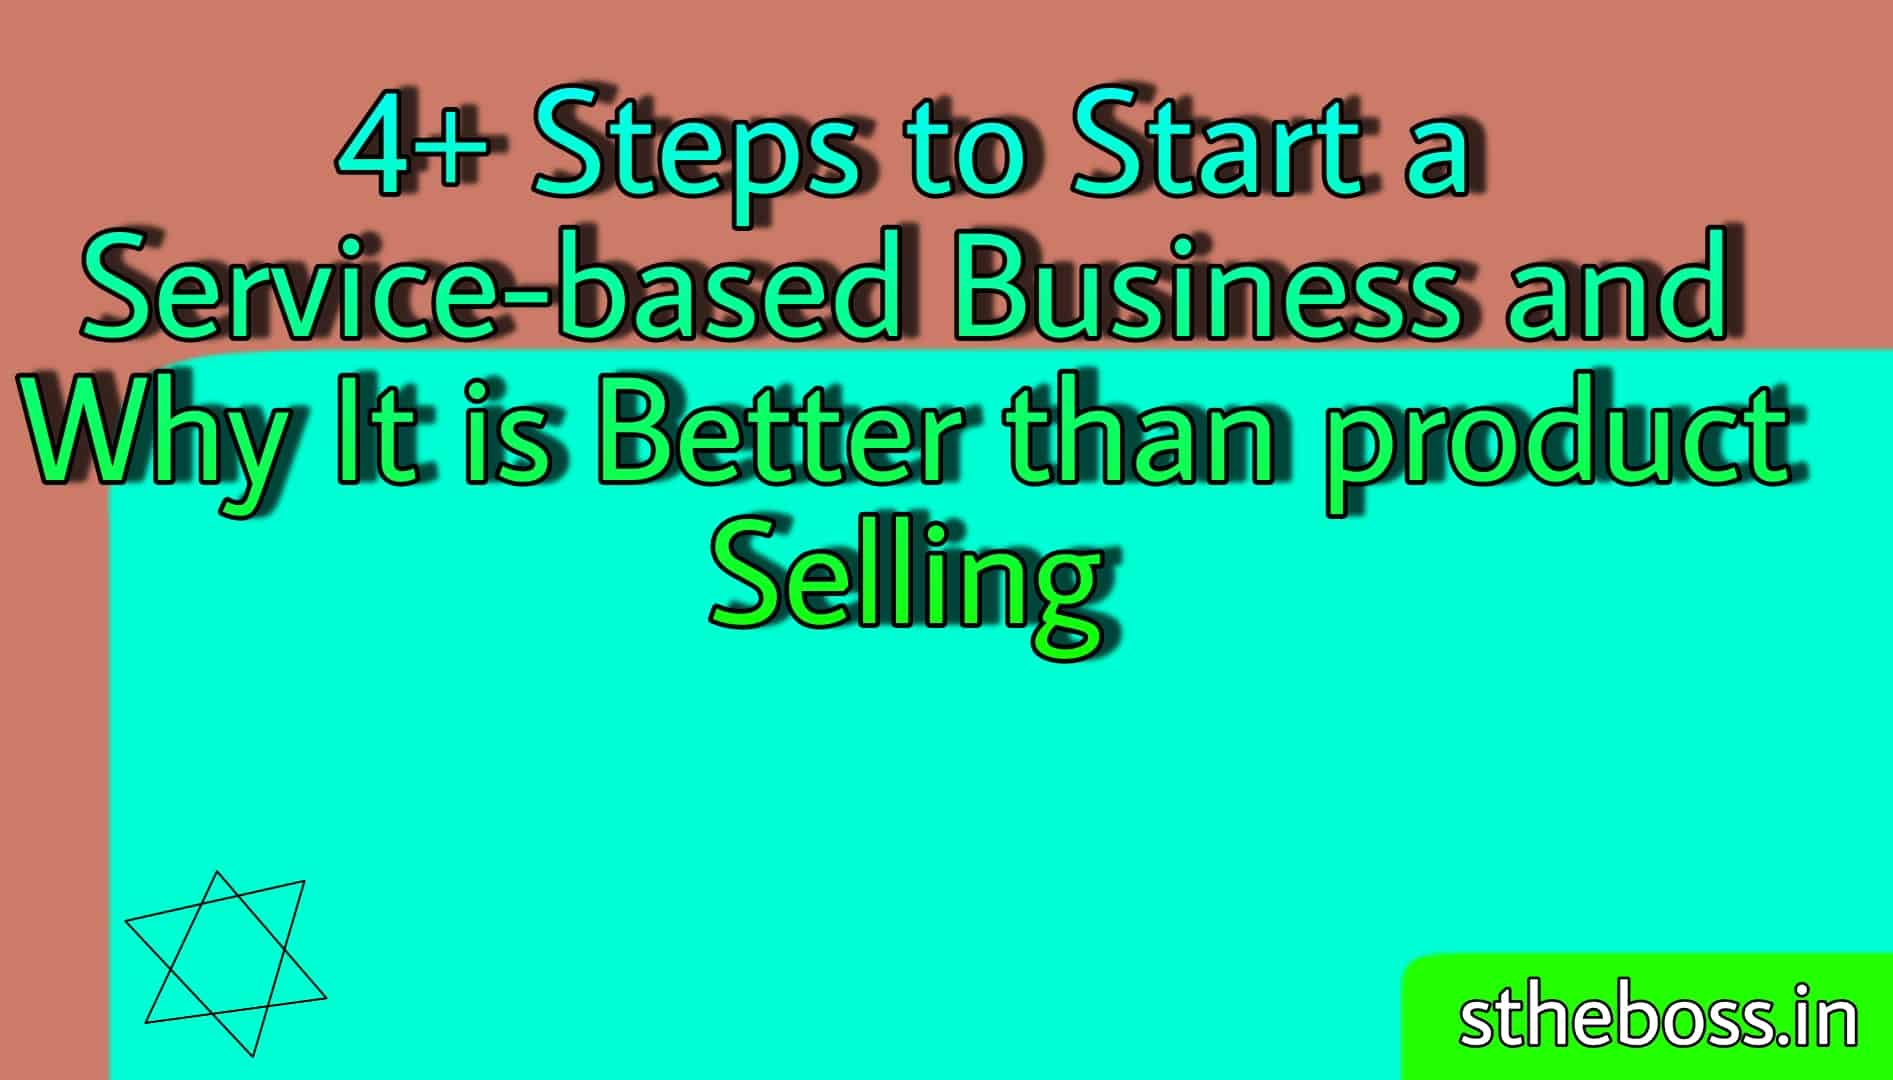 Steps to Start a Service-based Business and Why It is Better than product Selling